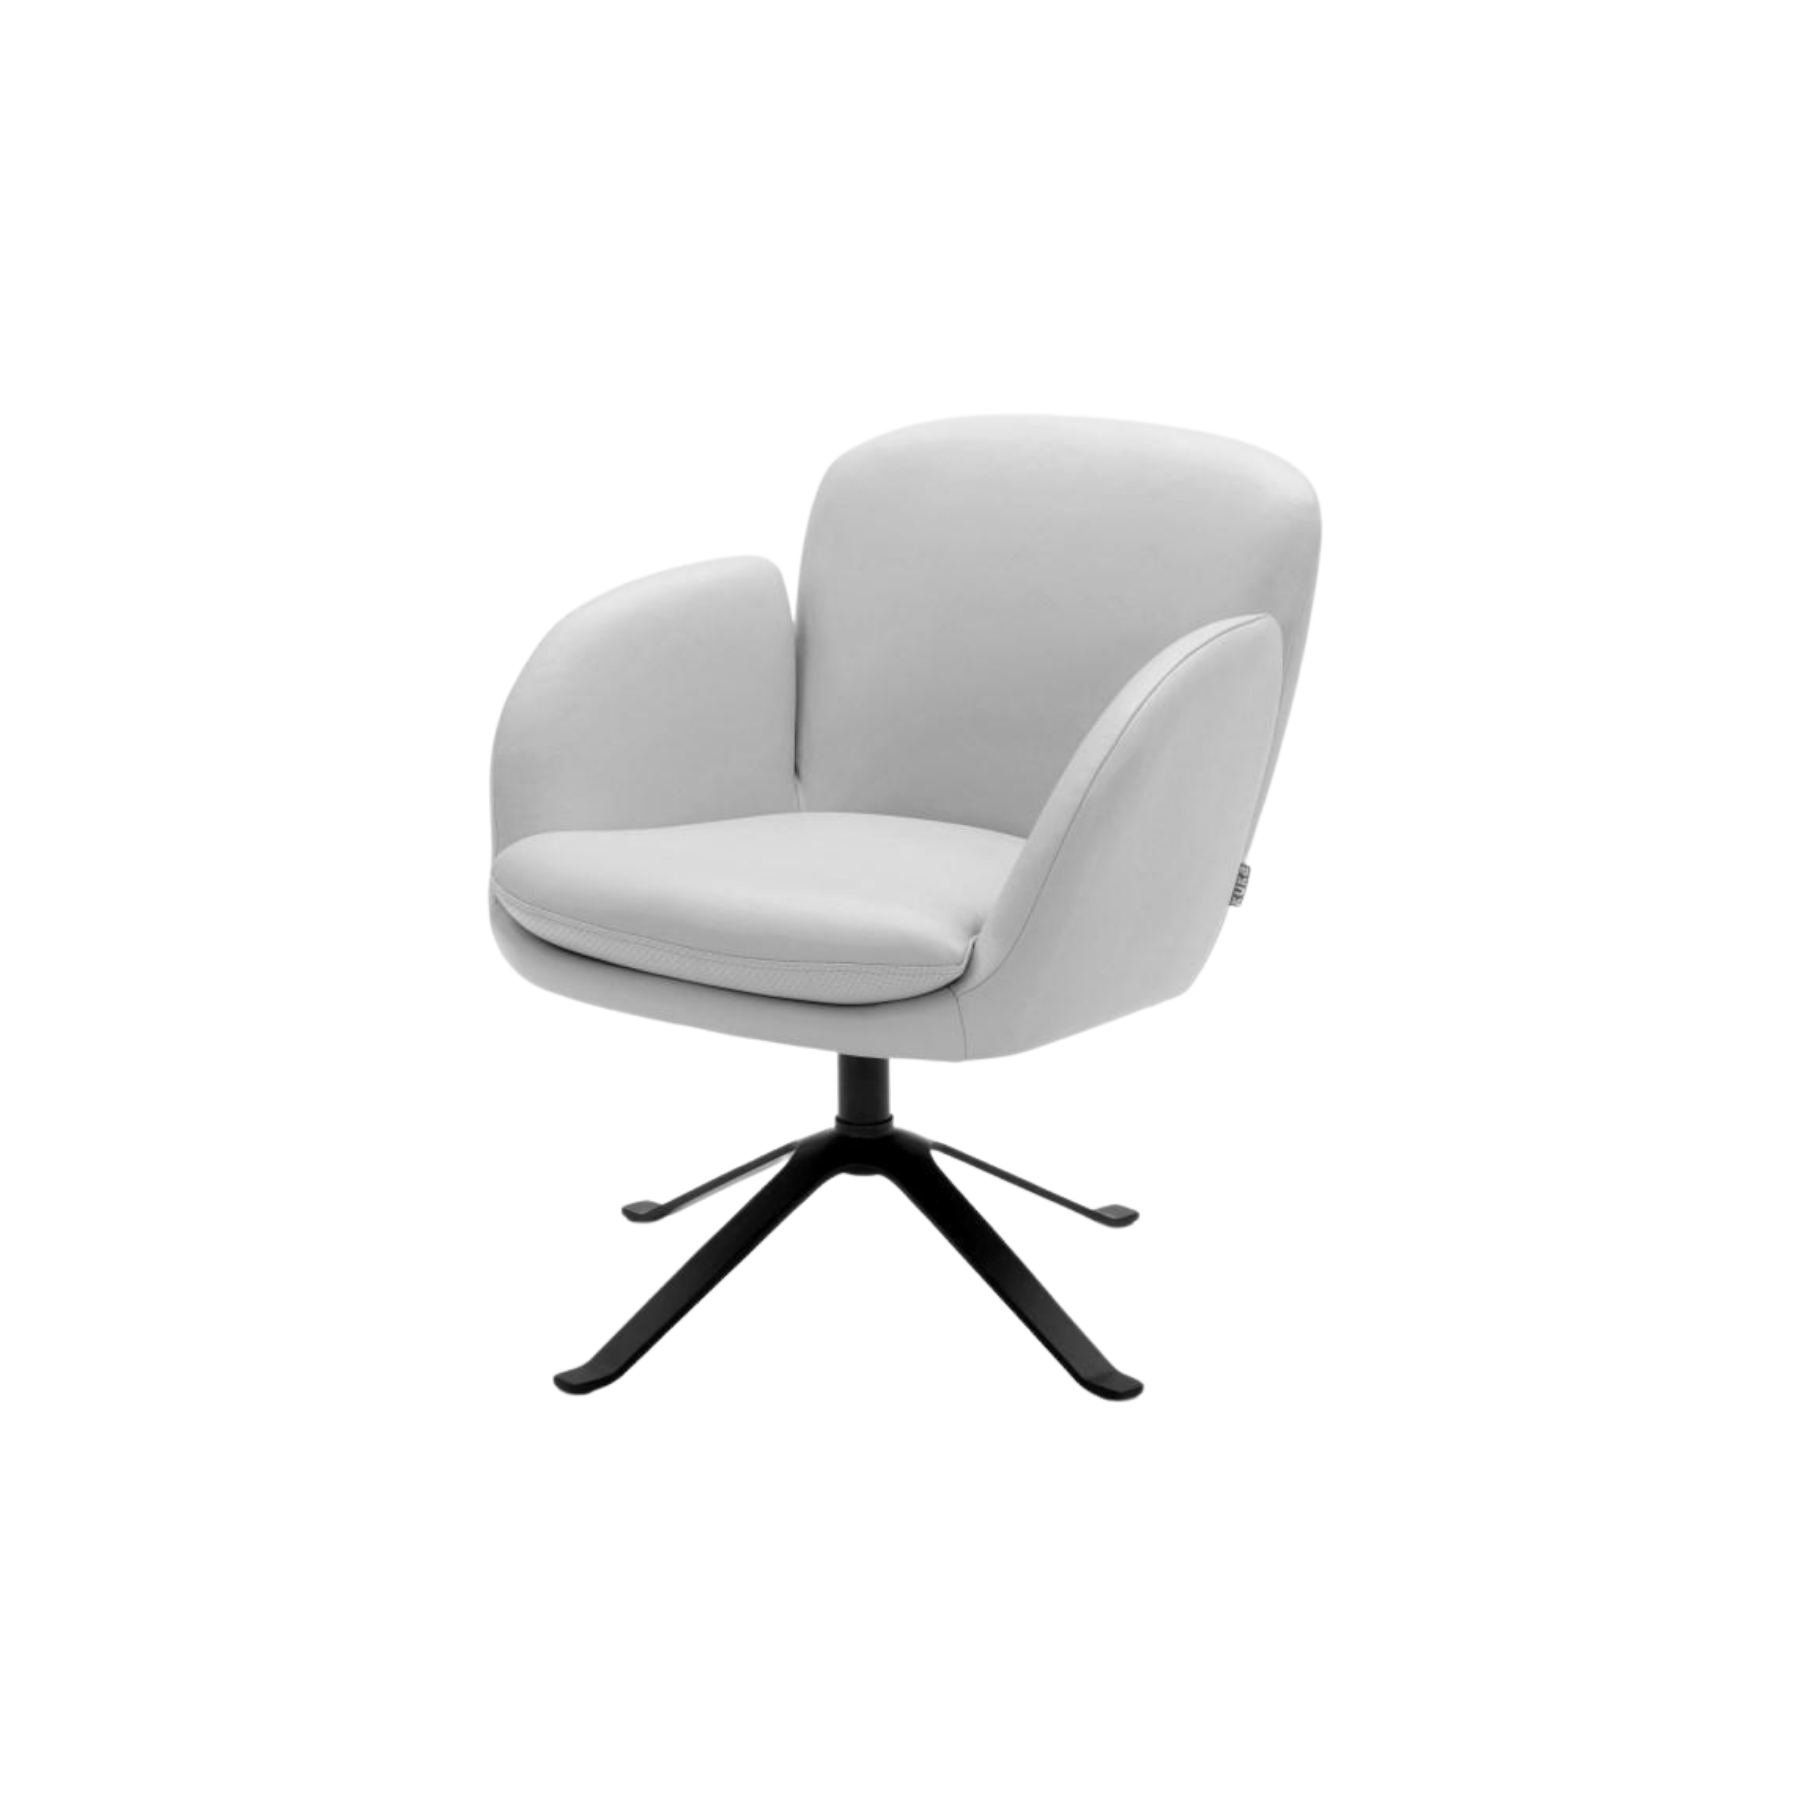 Voss Leather Swivel Chair